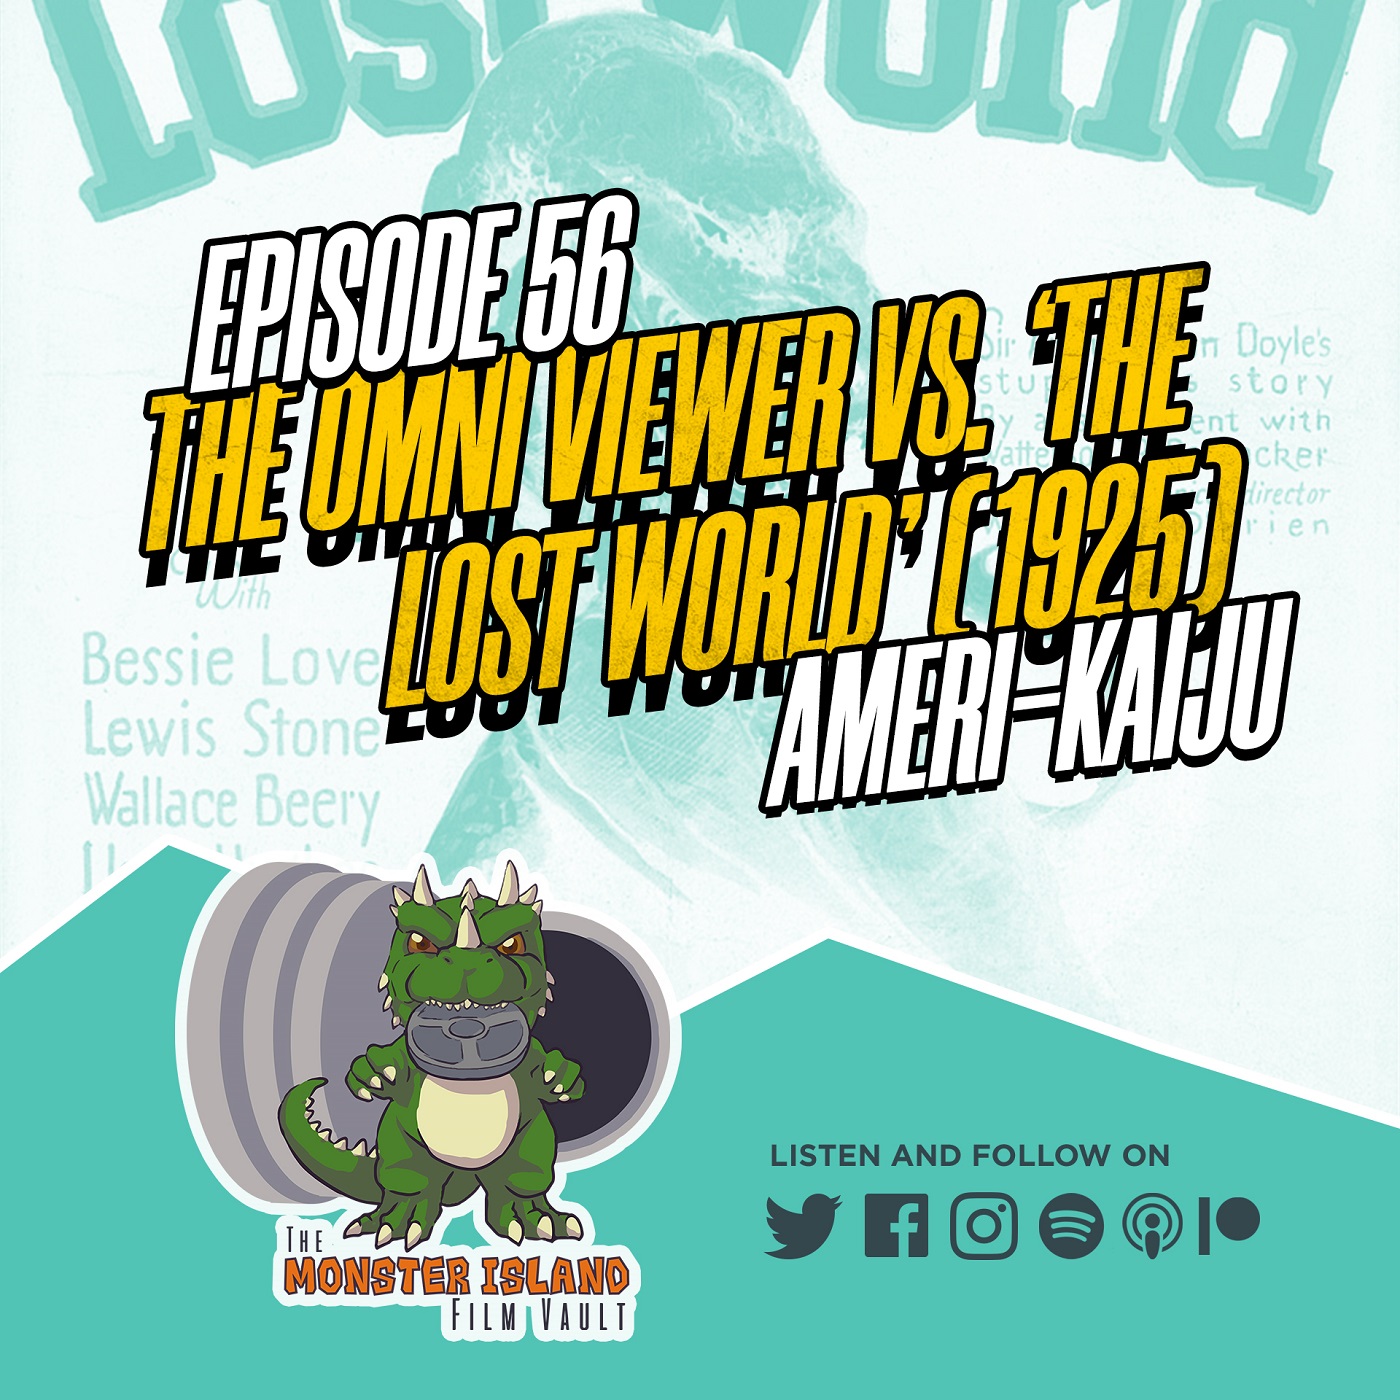 Episode 56: The Omni Viewer vs. ‘The Lost World’ (1925)